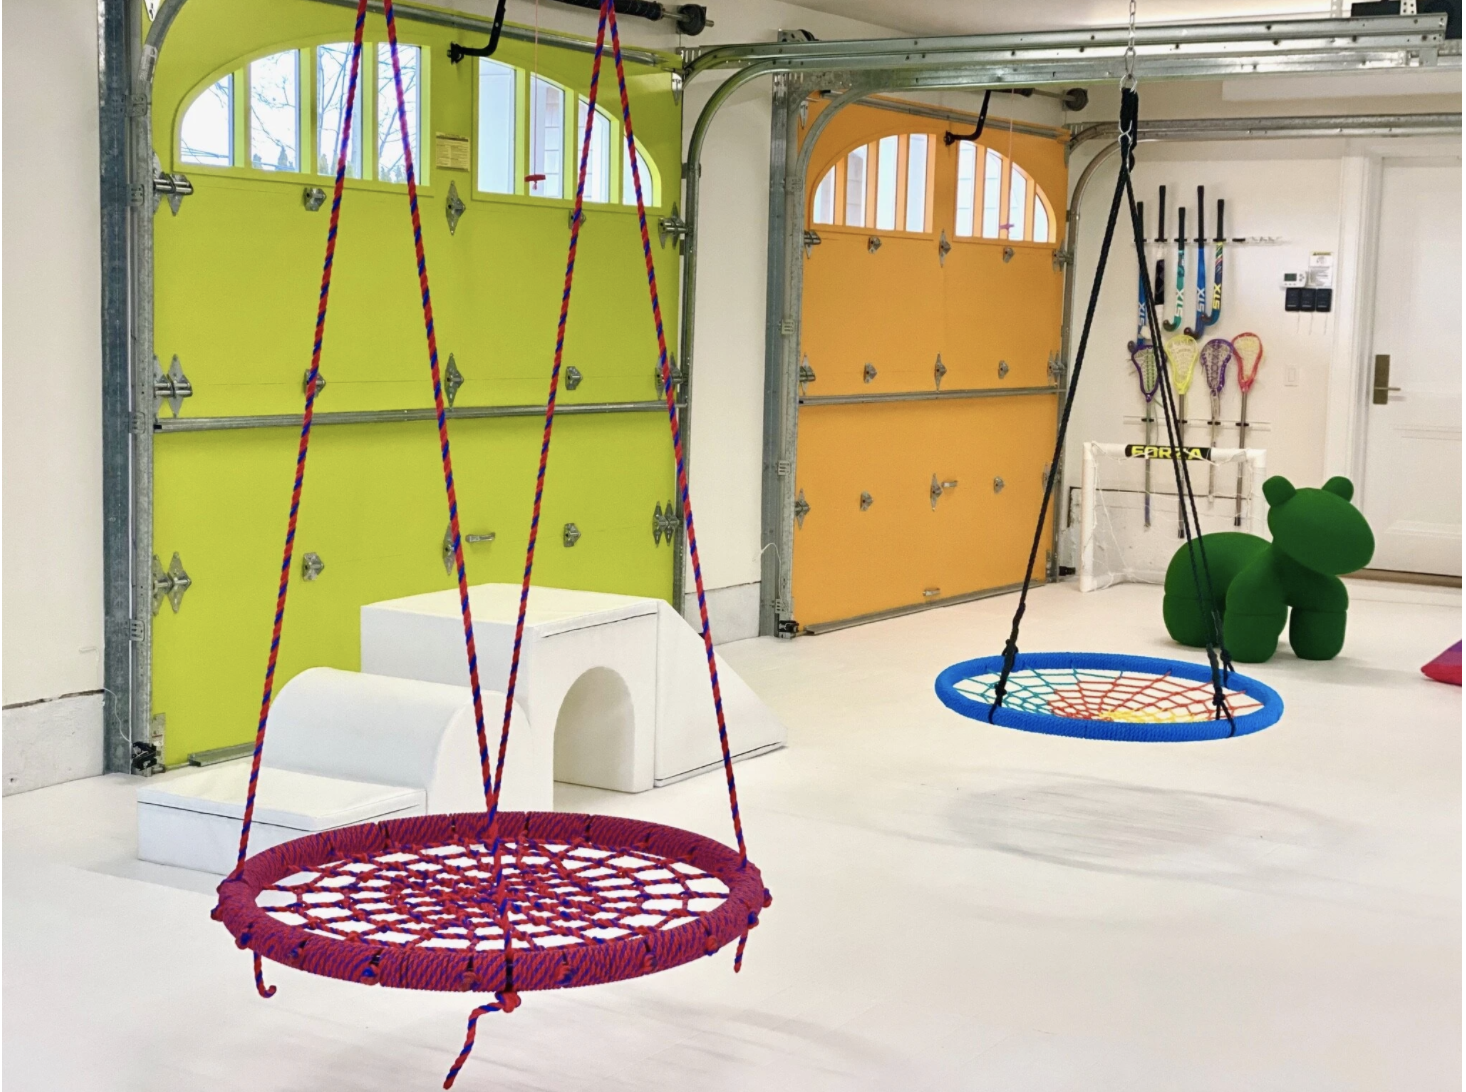 7 Things to Consider When Designing a Big Kids Playroom